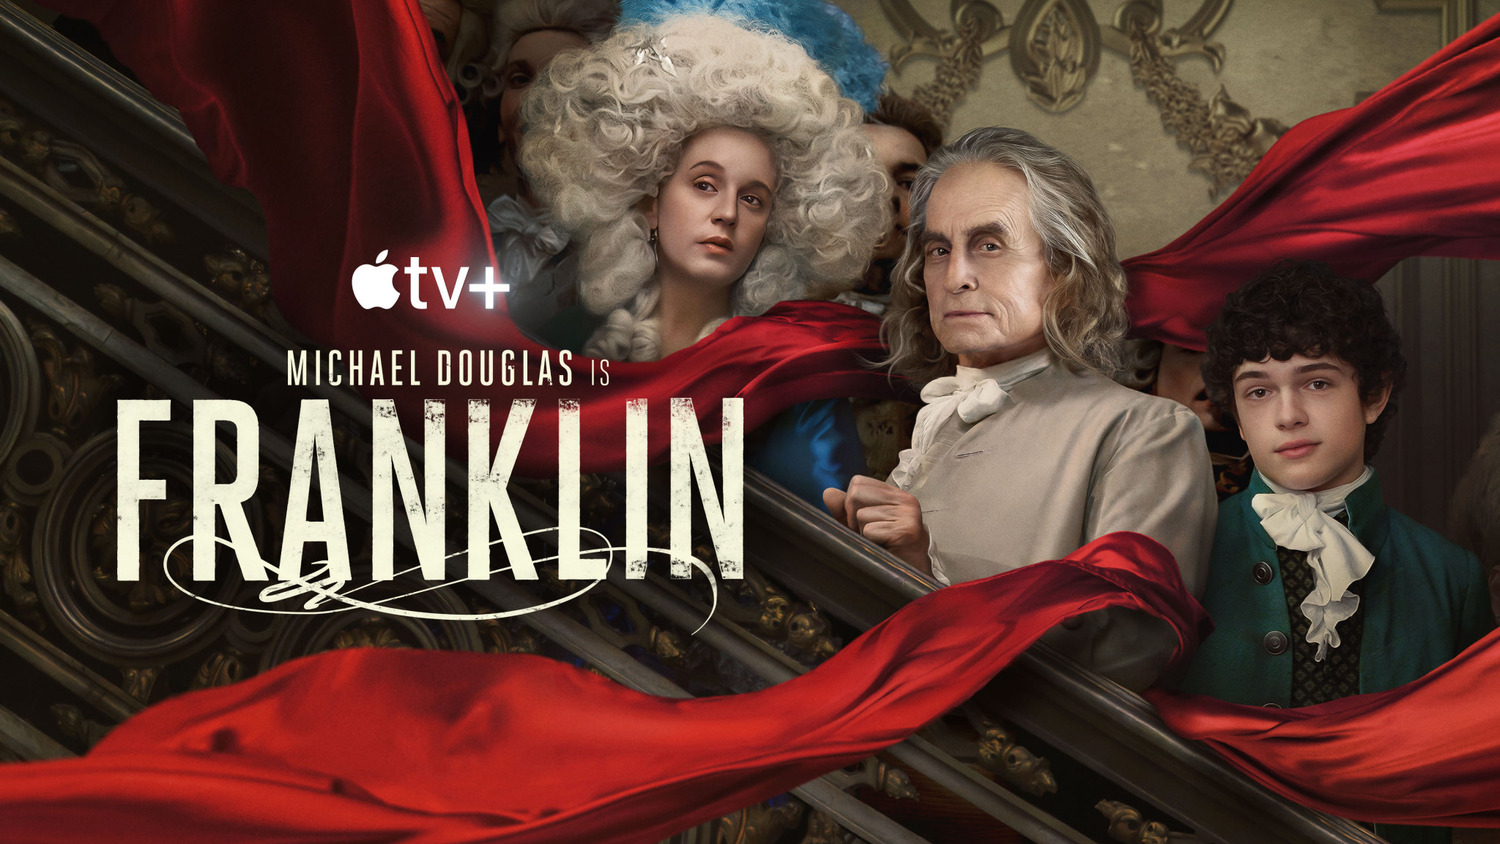 Extra Large TV Poster Image for Franklin (#2 of 2)